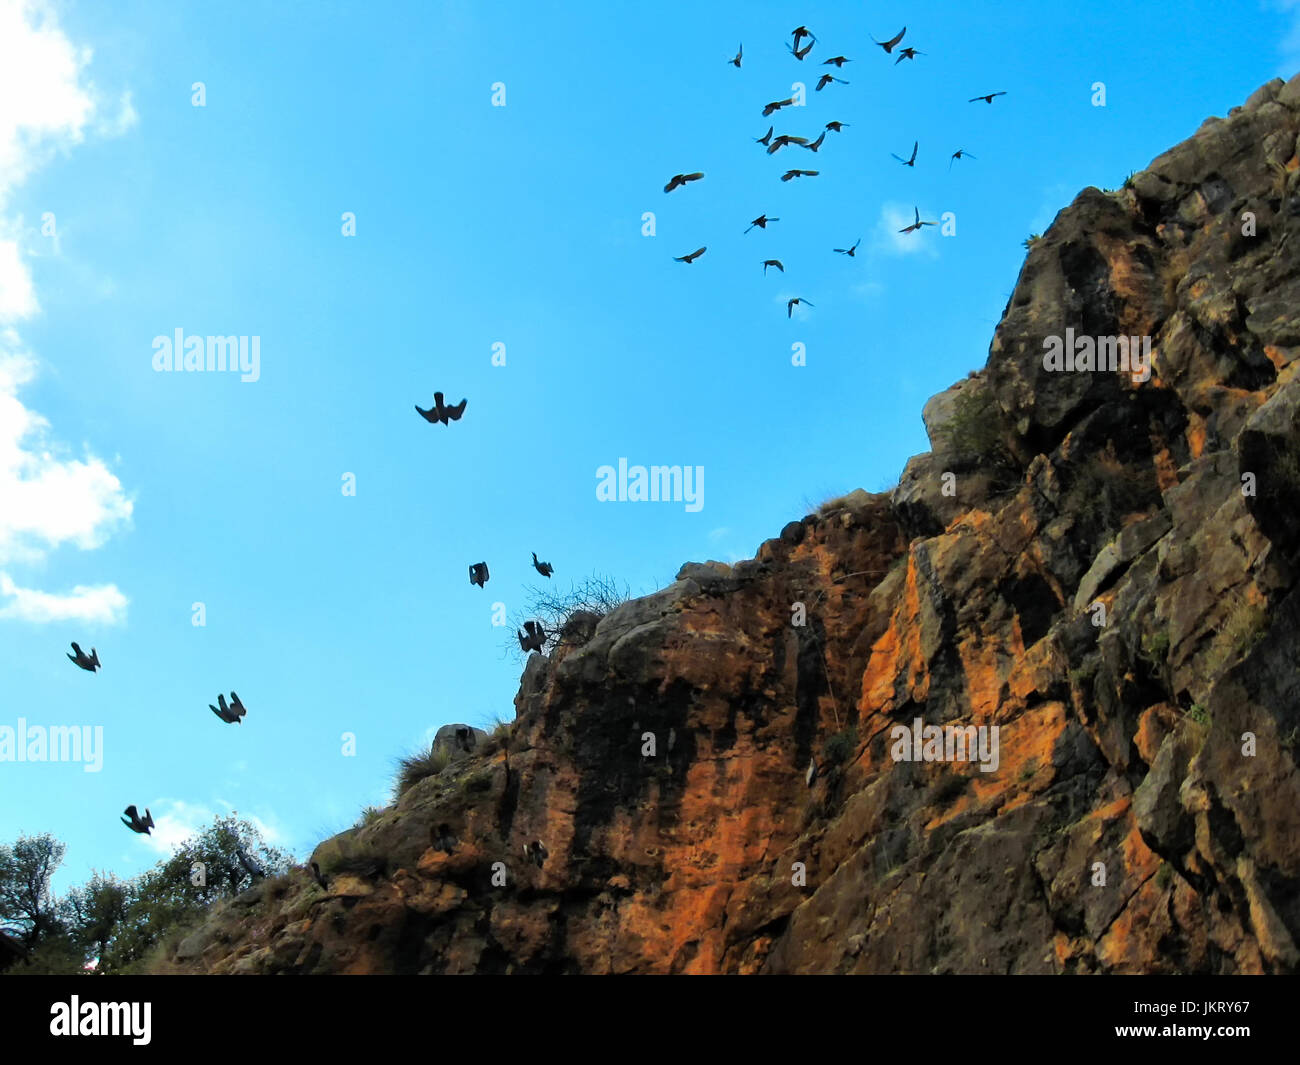 A flock of birds fly around a cave entrance on a cliff wall, silhouetted against a blue sky. Stock Photo